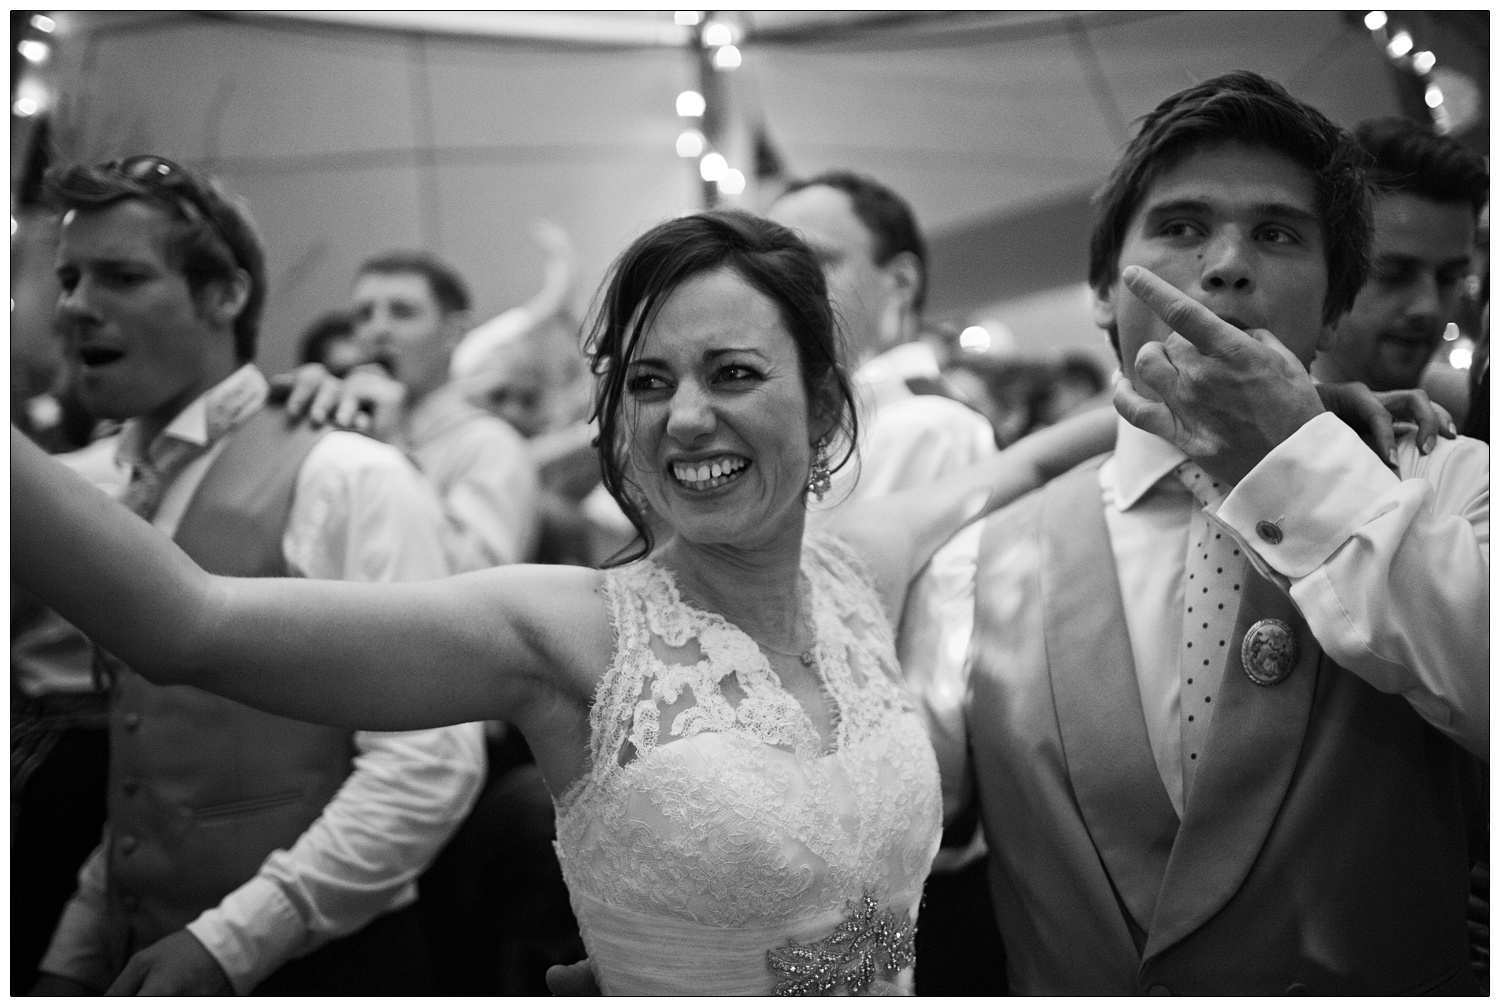 The groom is wolf whistling and his wife is smiling as they dance on packed dance floor at a wedding in Essex.